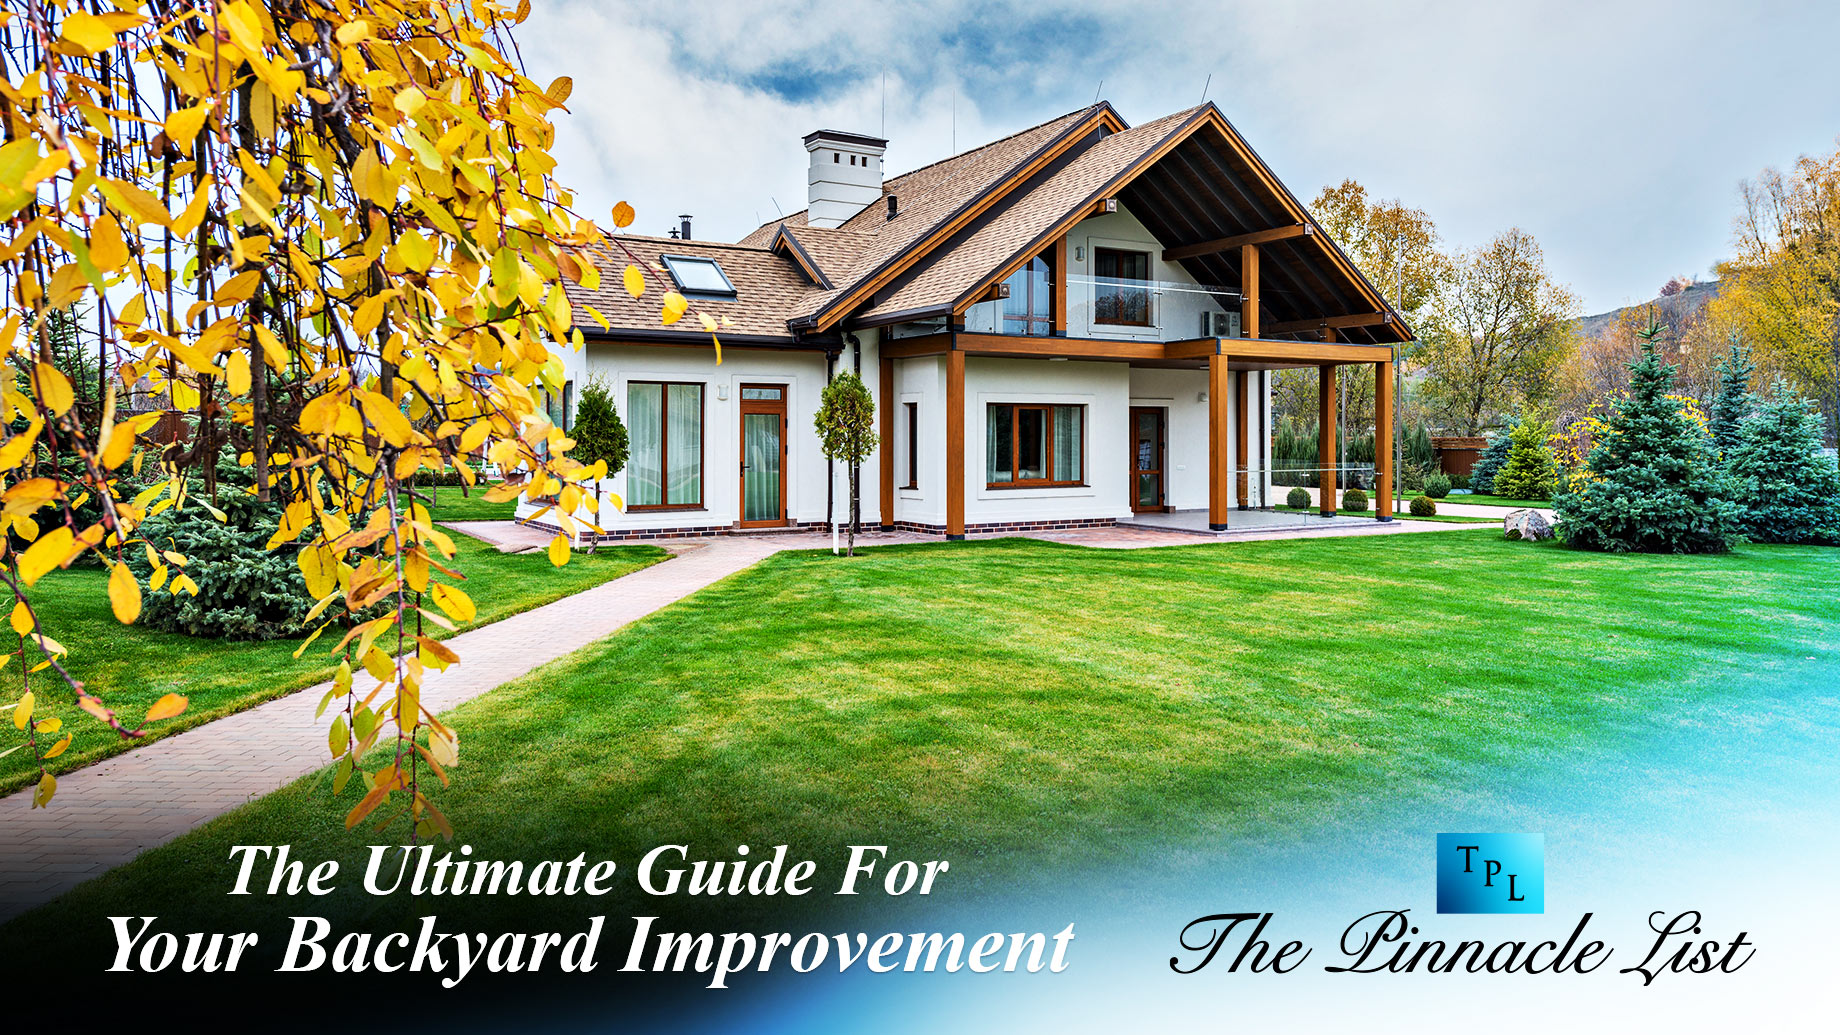 Be Practical And Safe: The Ultimate Guide For Your Backyard Improvement